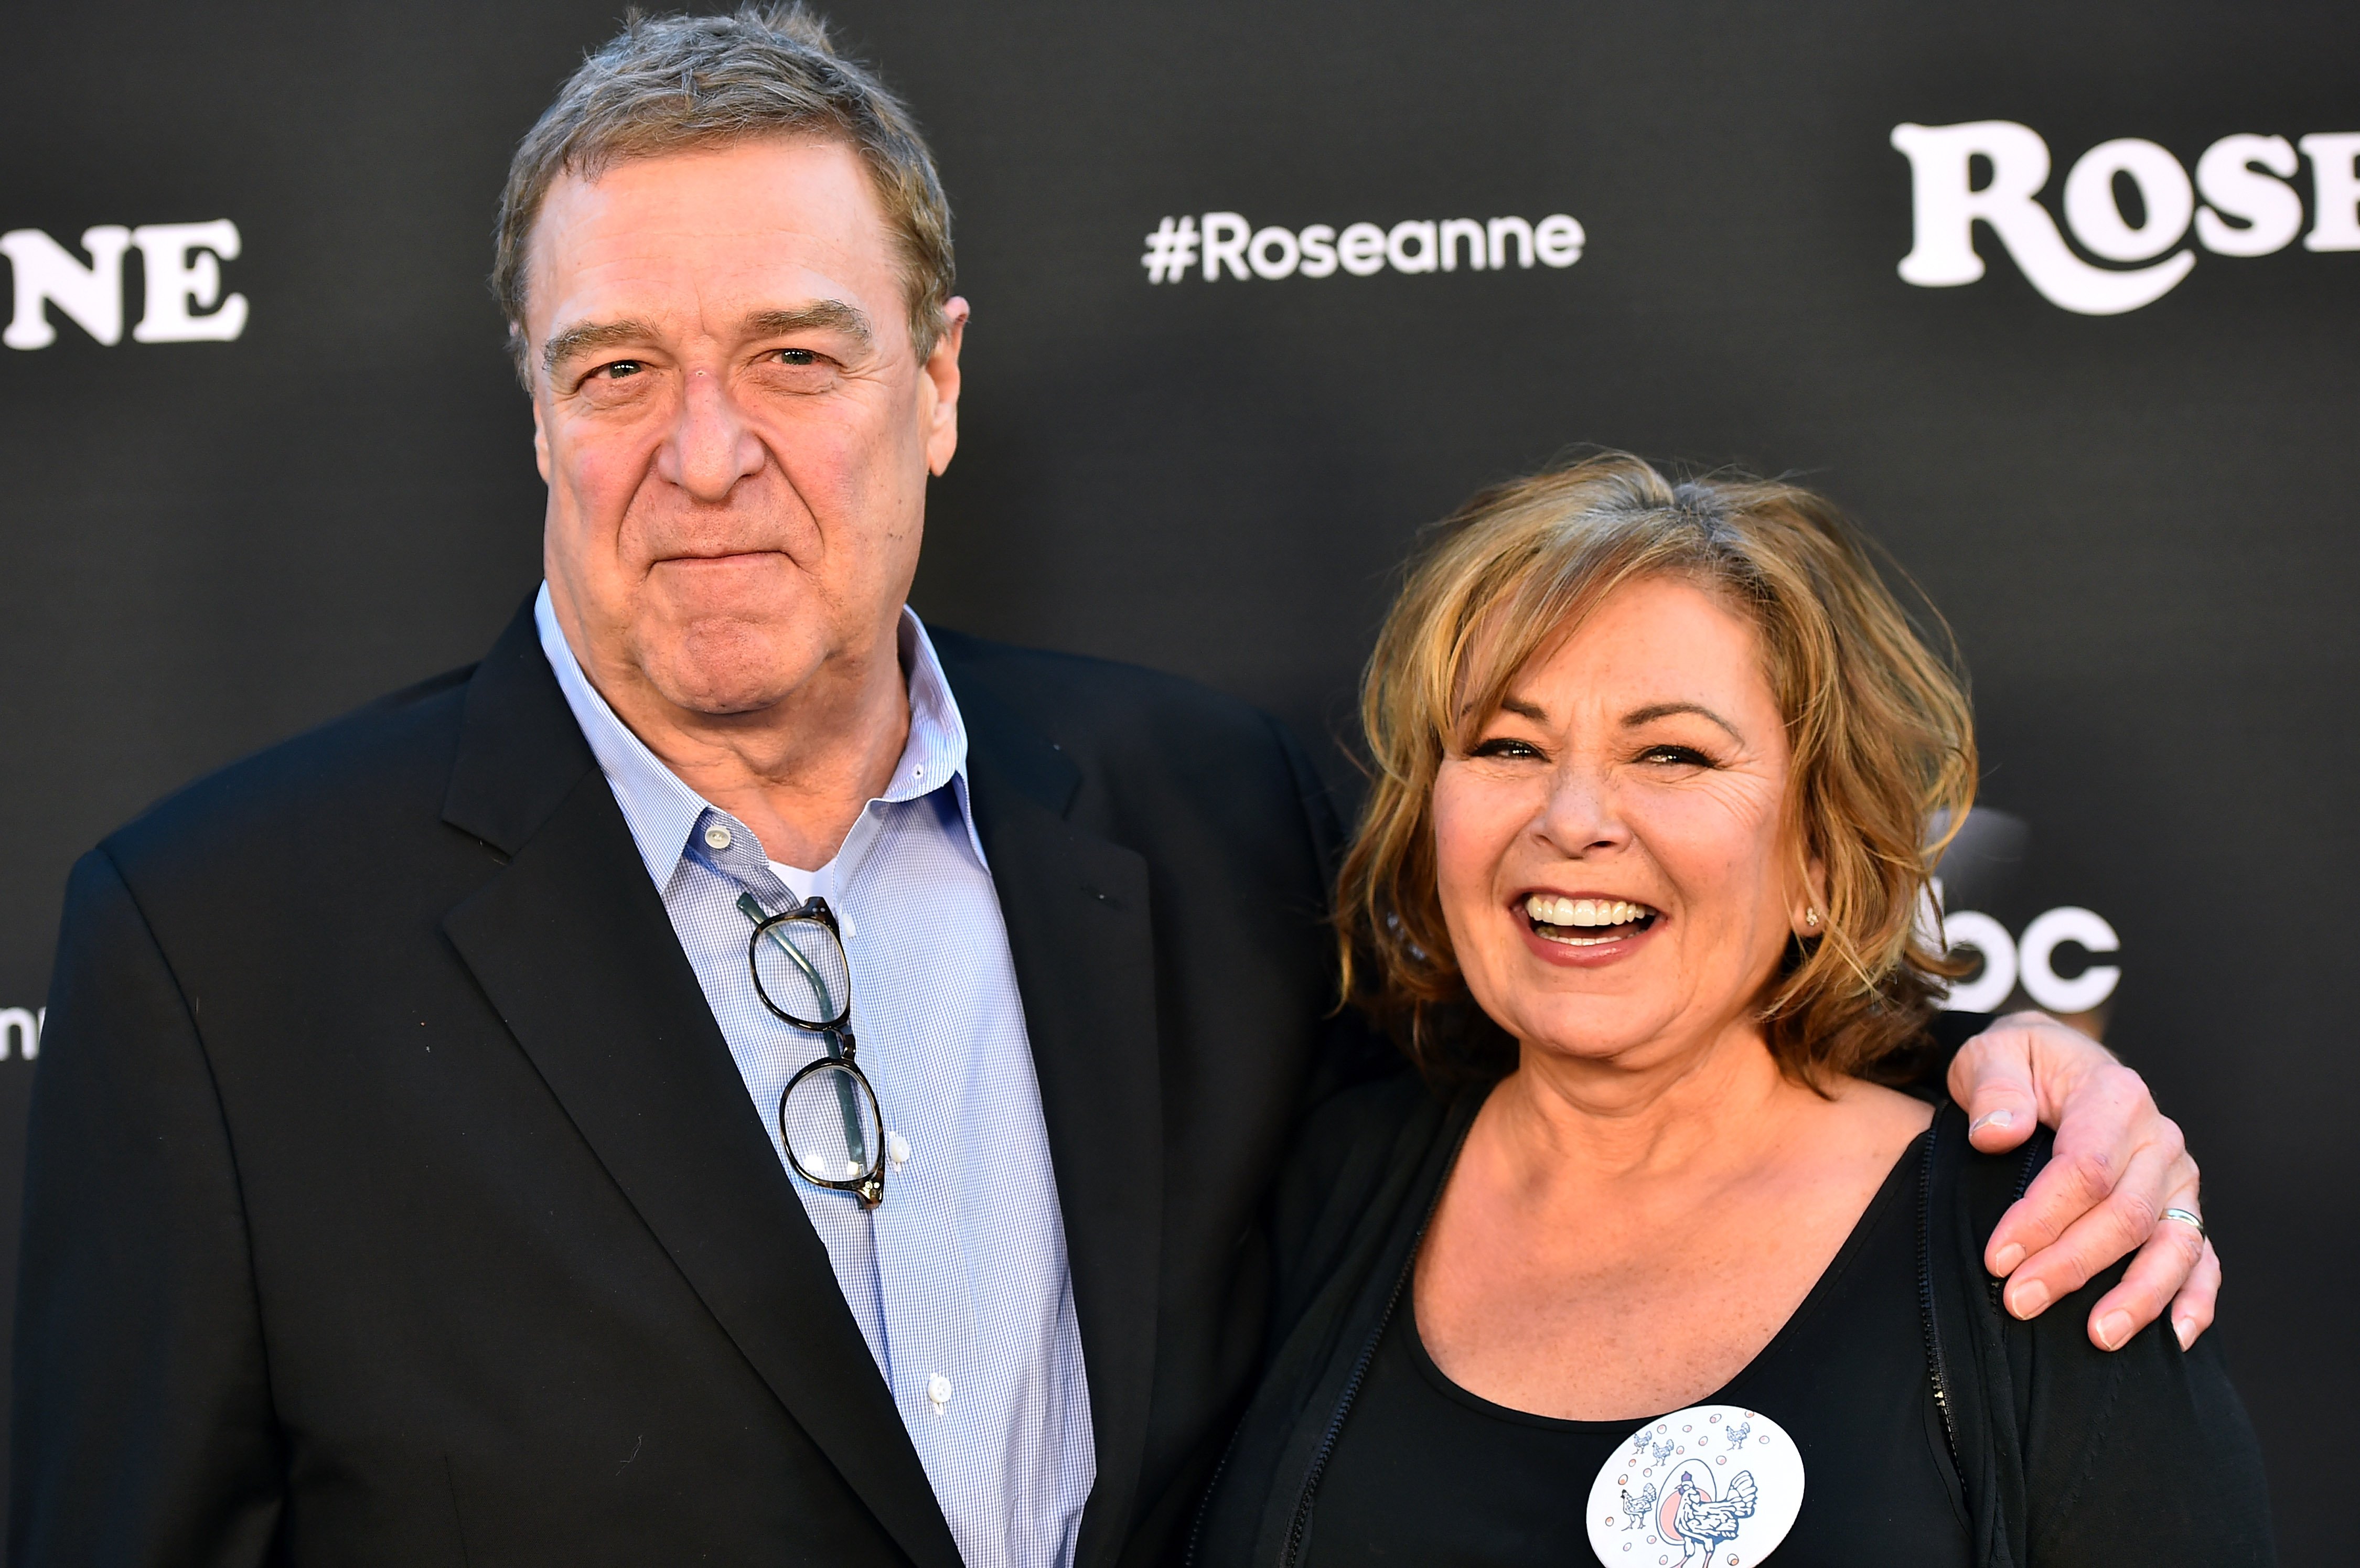  John Goodman and Roseanne Barr attend the premiere of ABC's "Roseanne" at Walt Disney Studio Lot on March 23, 2018 | Photo: GettyImages